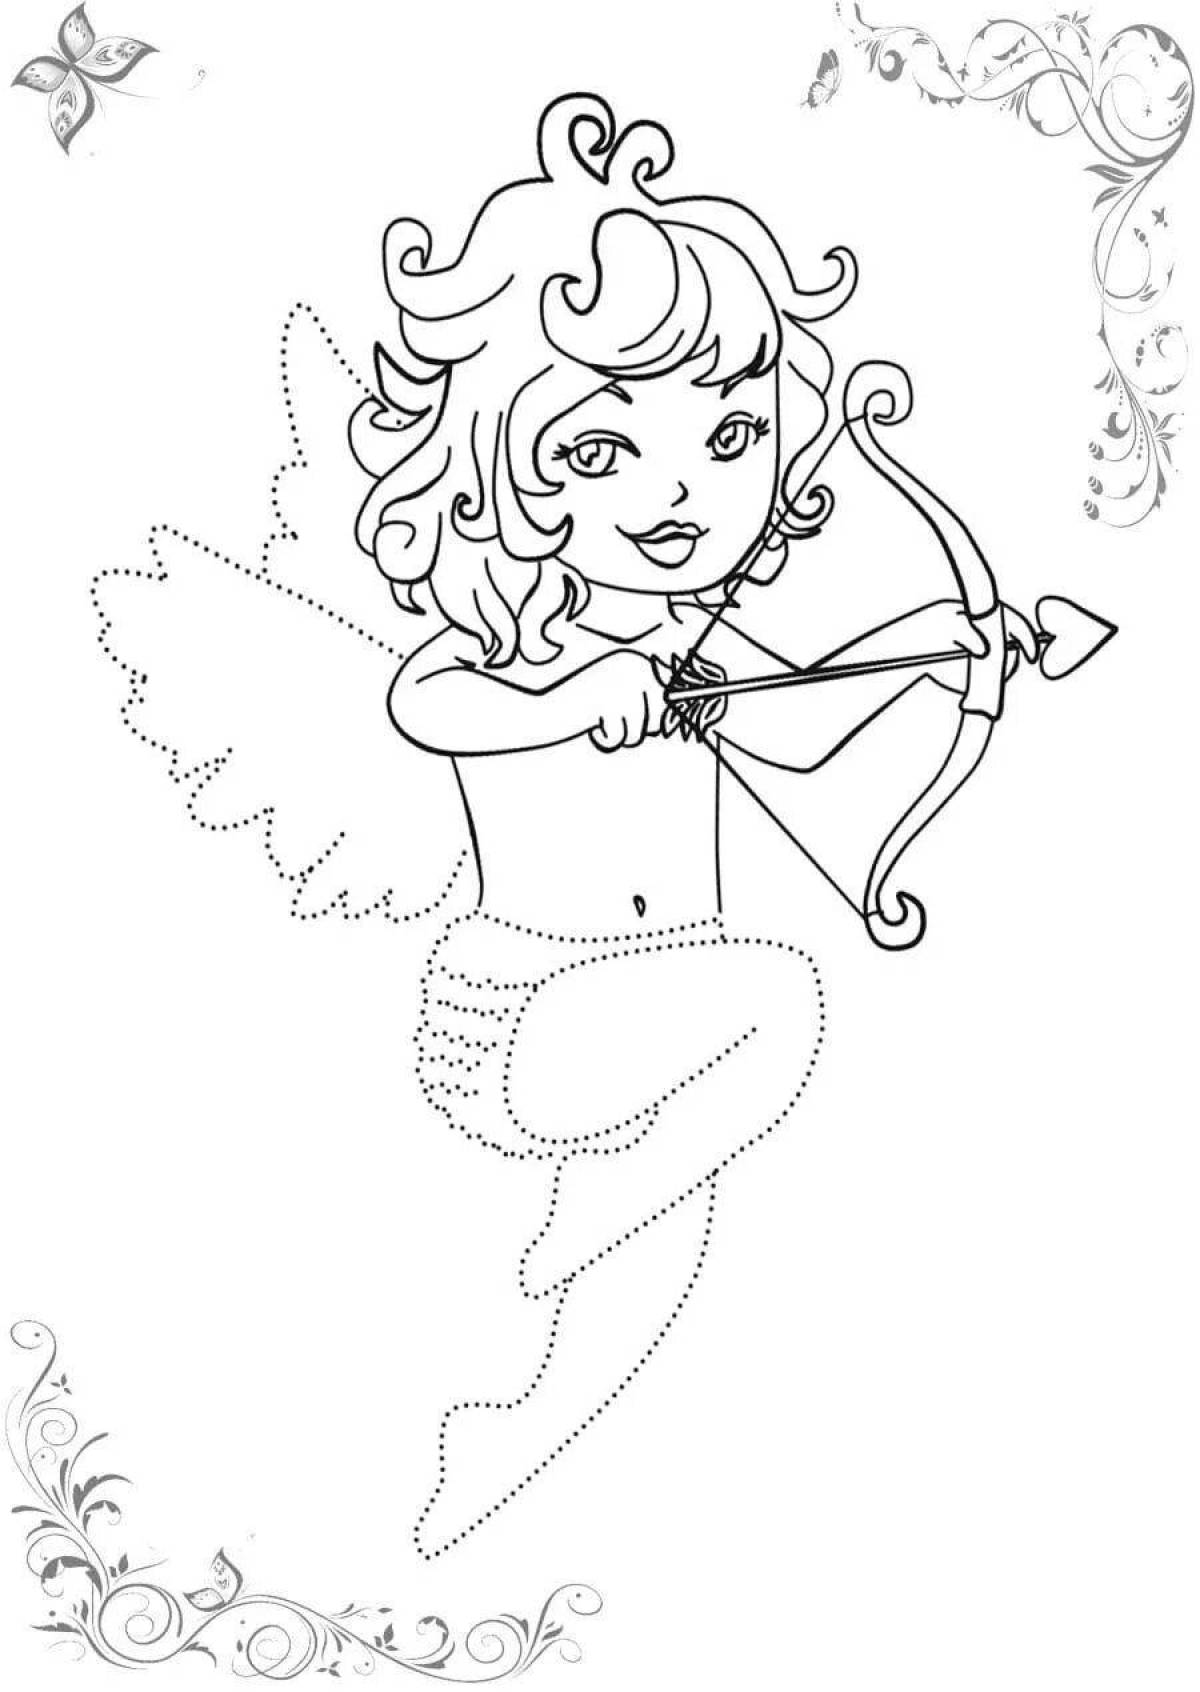 Sparkling cupid coloring page